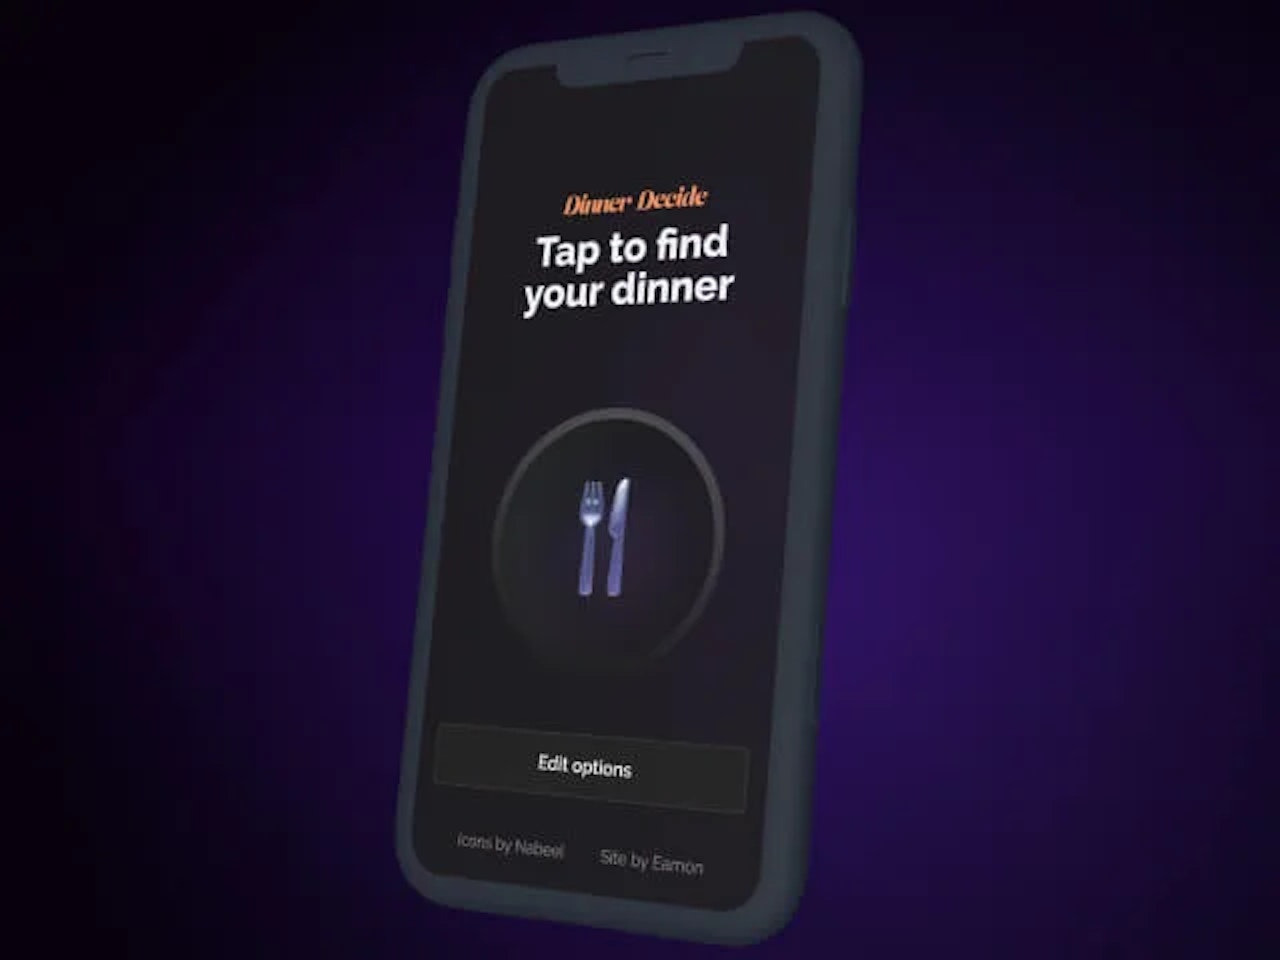 A photo of an iPhone mockup with the Dinner Decide website featured inside of it.